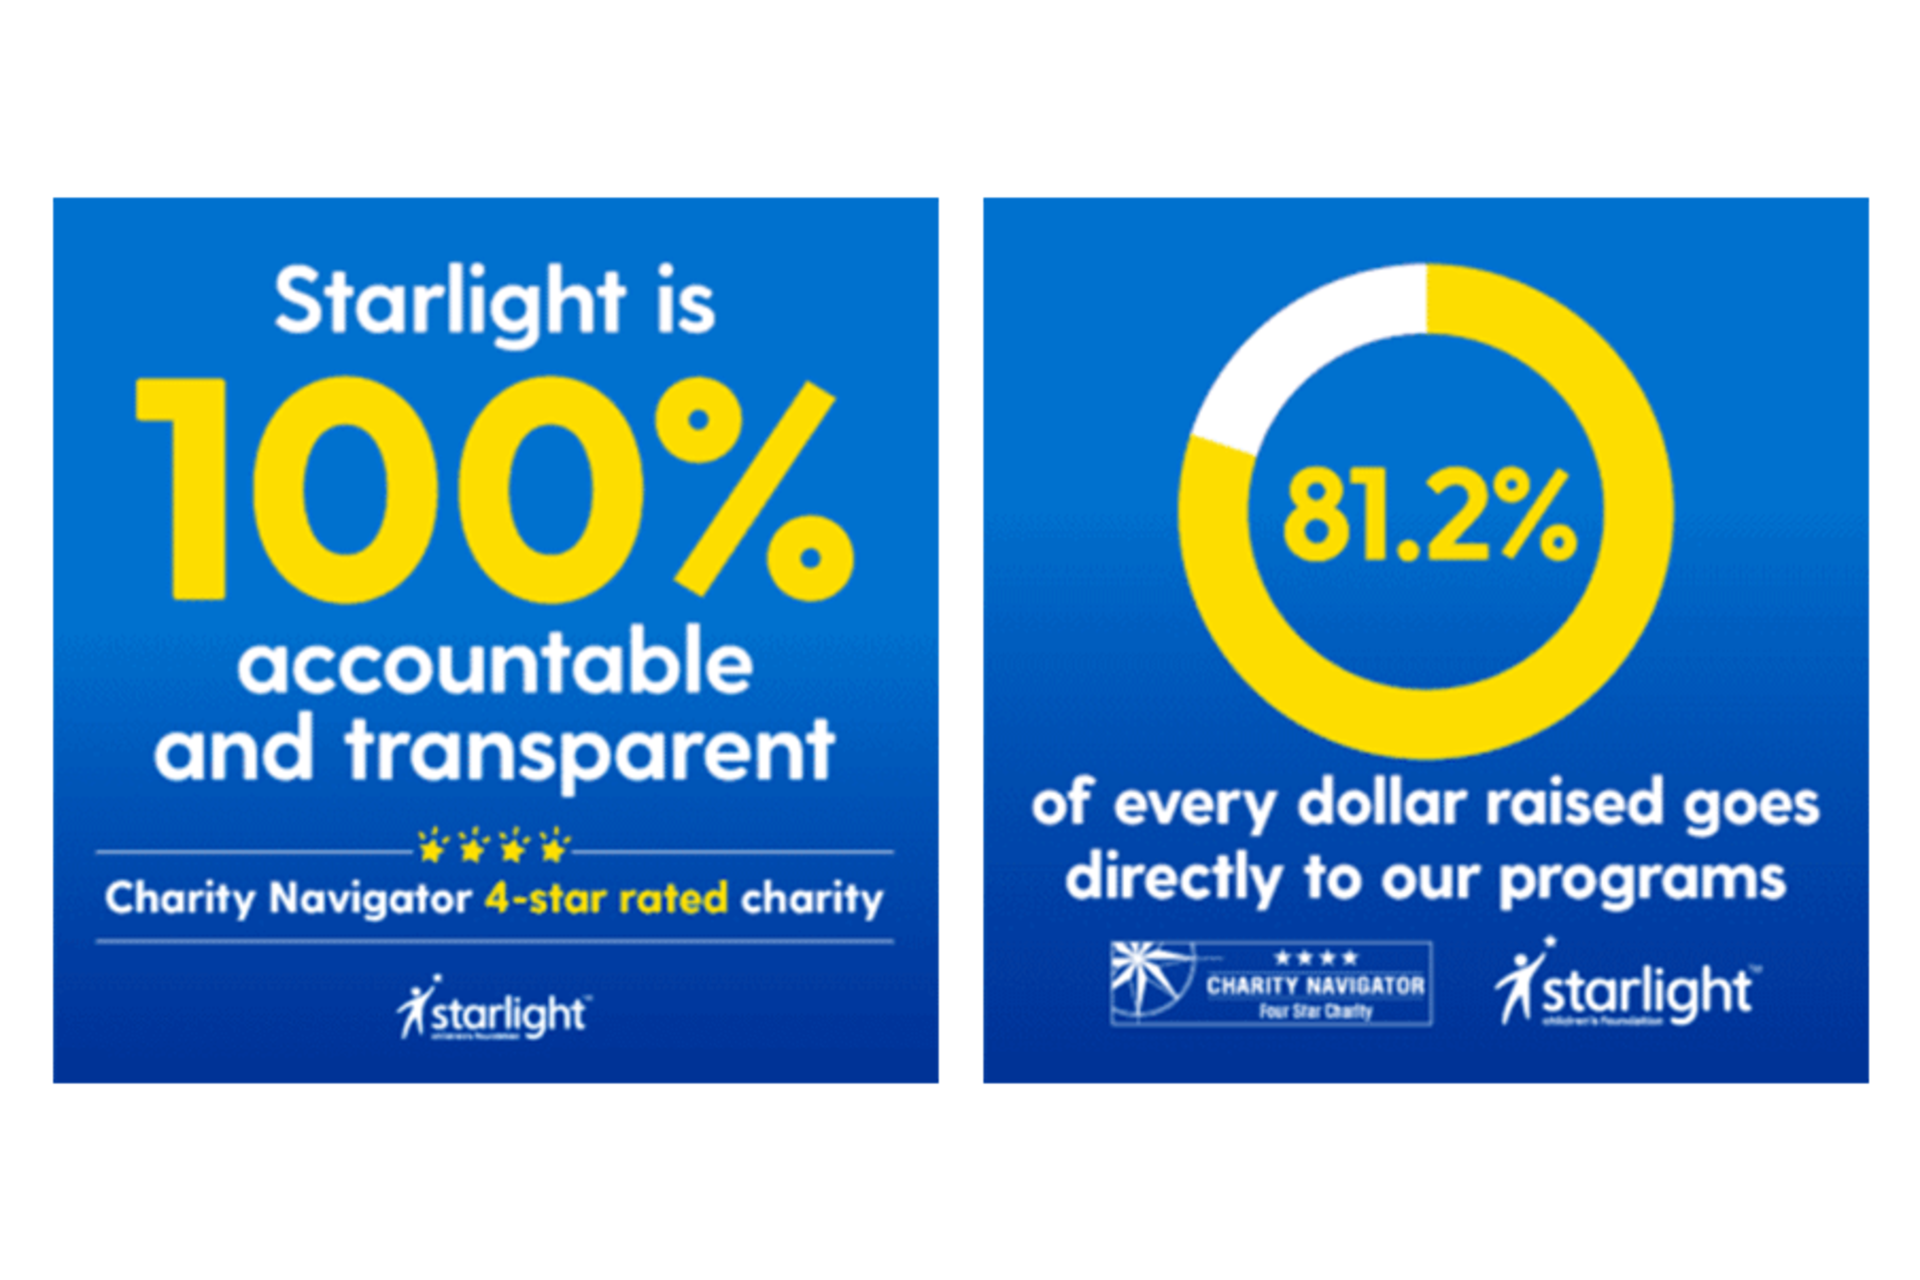 Starlight is 100% accountable and transparent and 81.2% of every dollar raised goes directly to programs